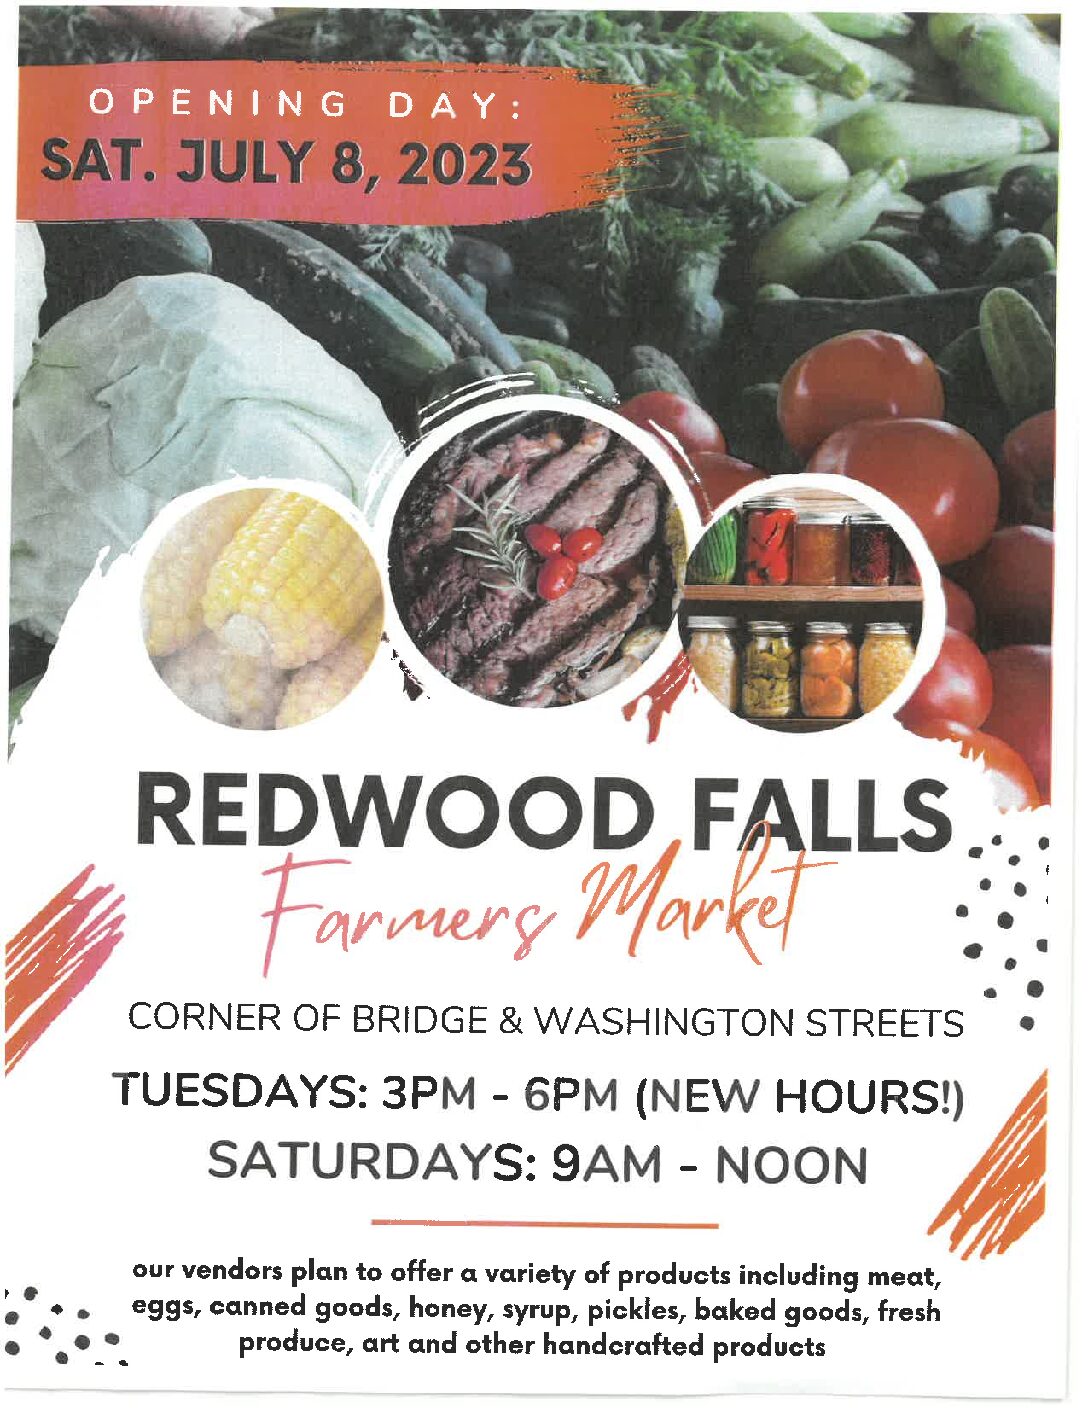 <h1 class="tribe-events-single-event-title">Redwood Falls Farmers Market</h1>